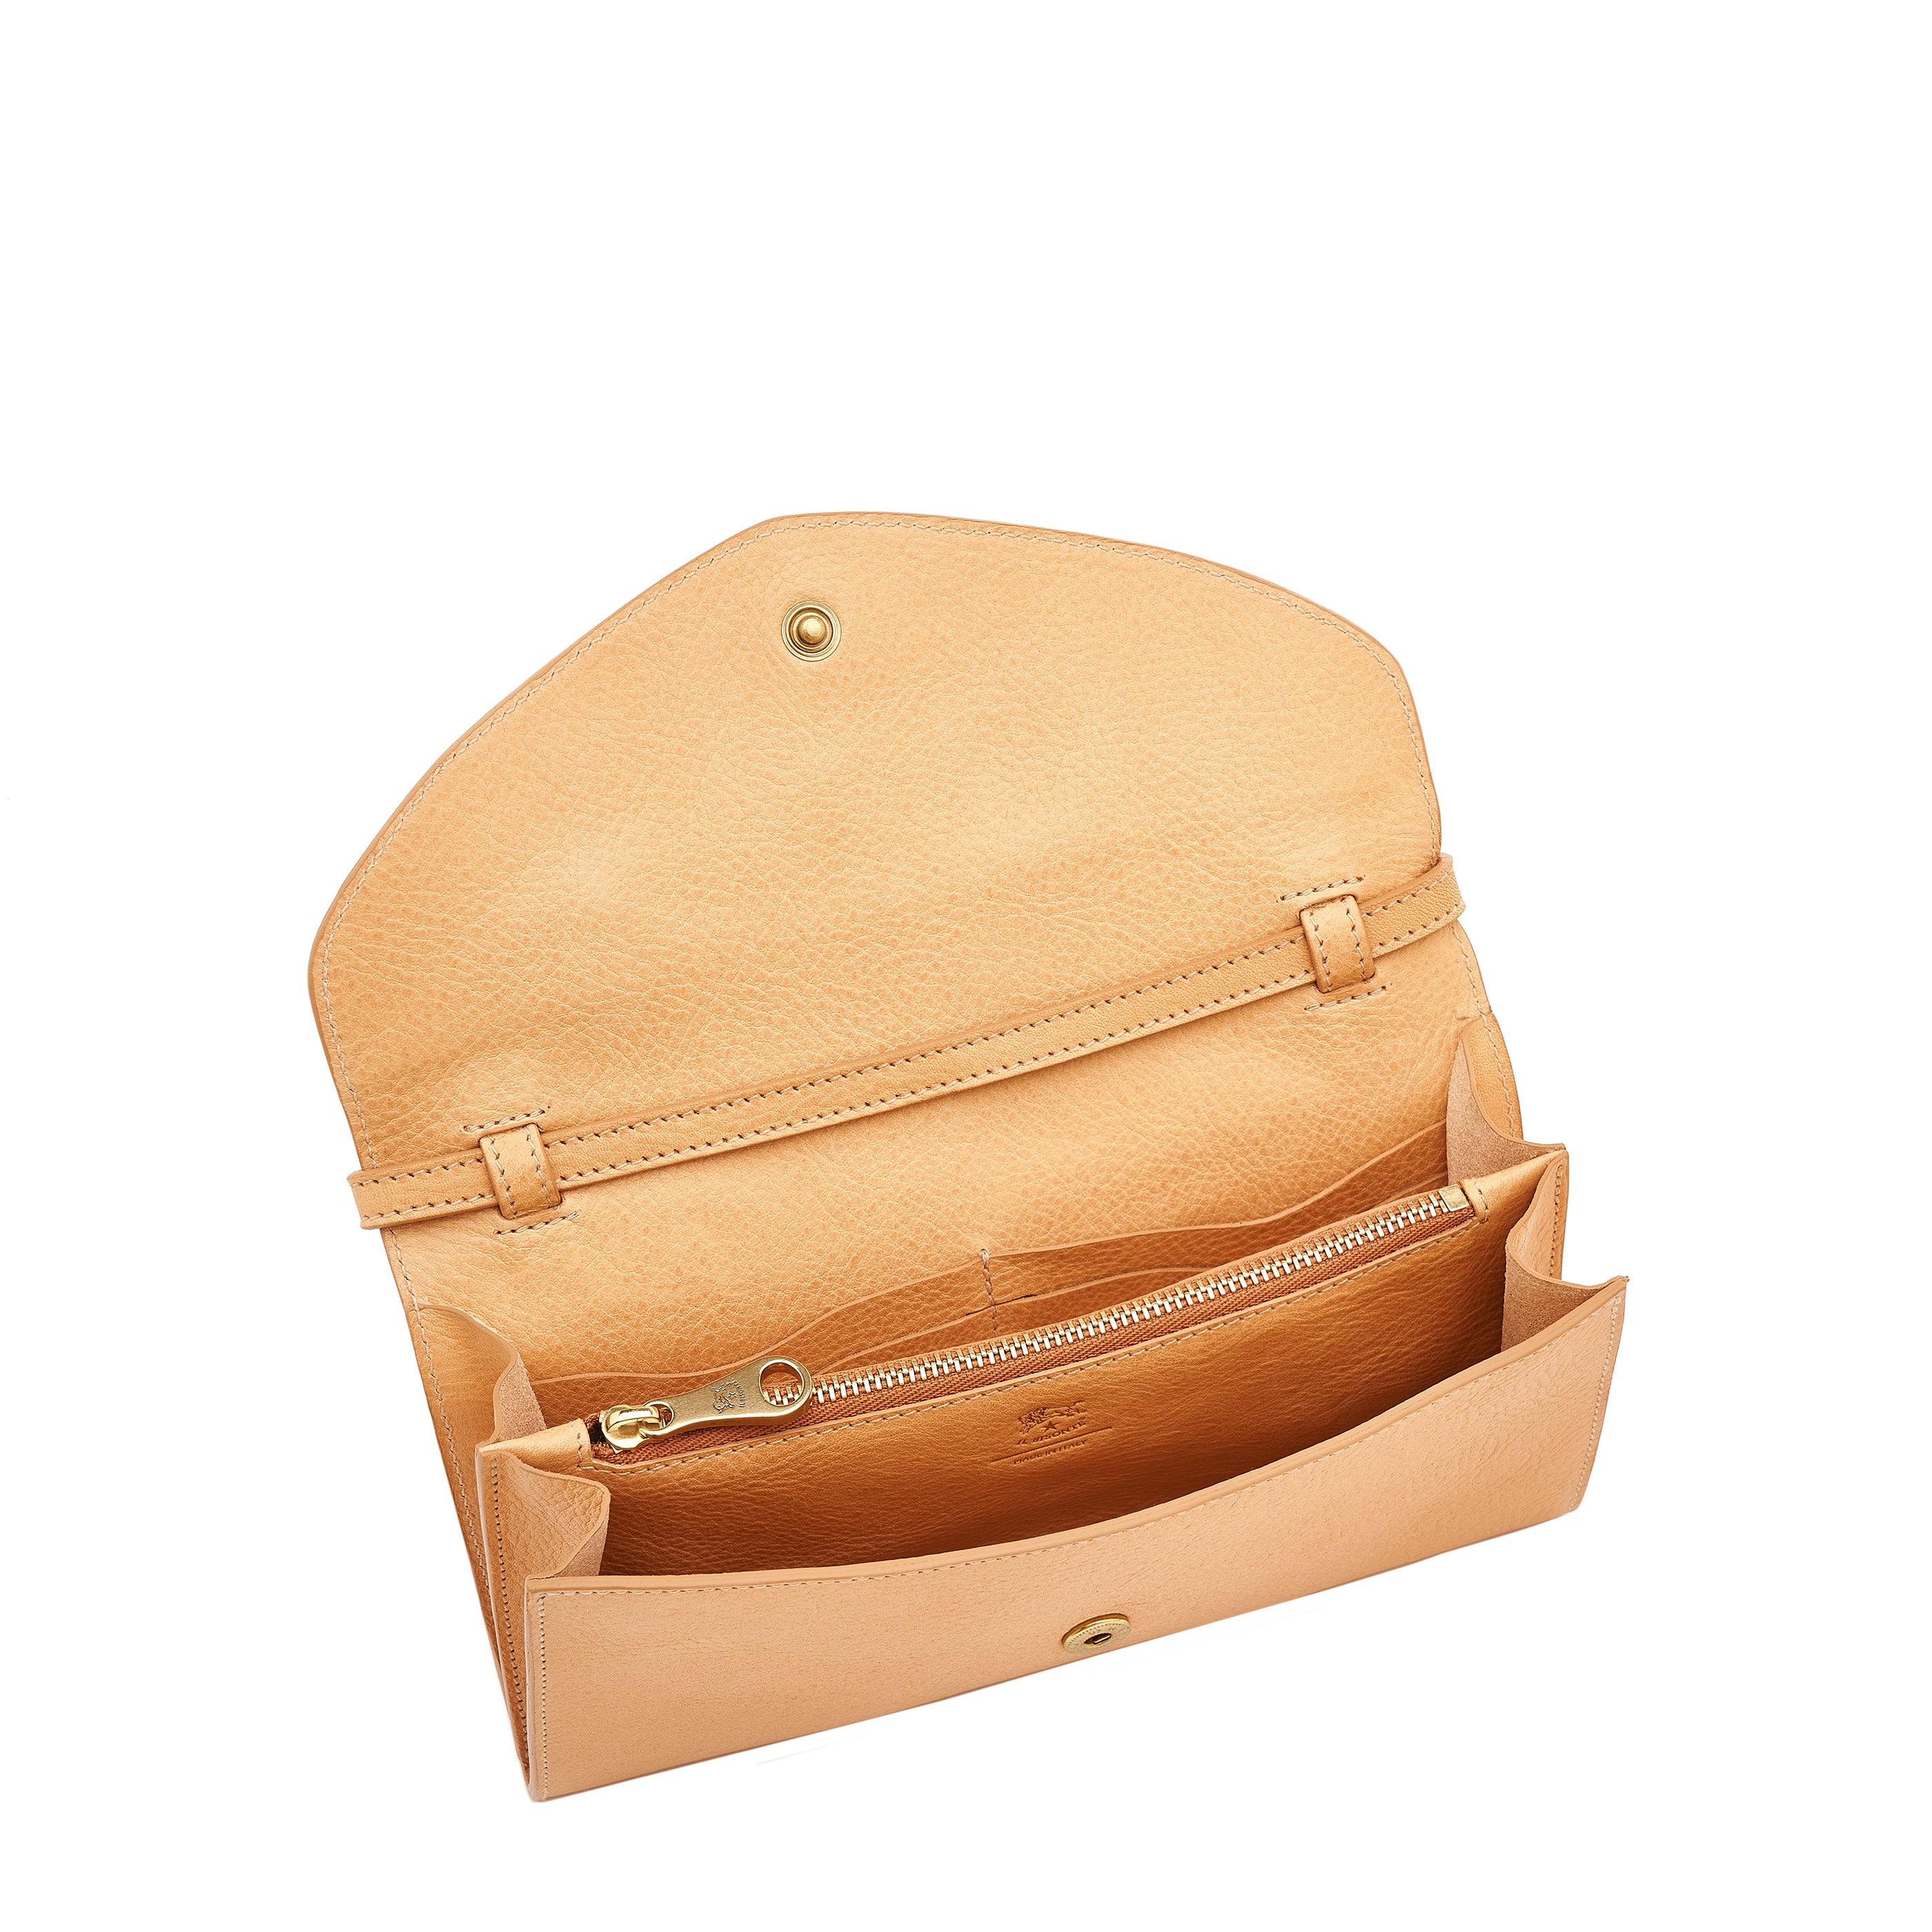 Bigallo | Women's clutch bag in leather color natural